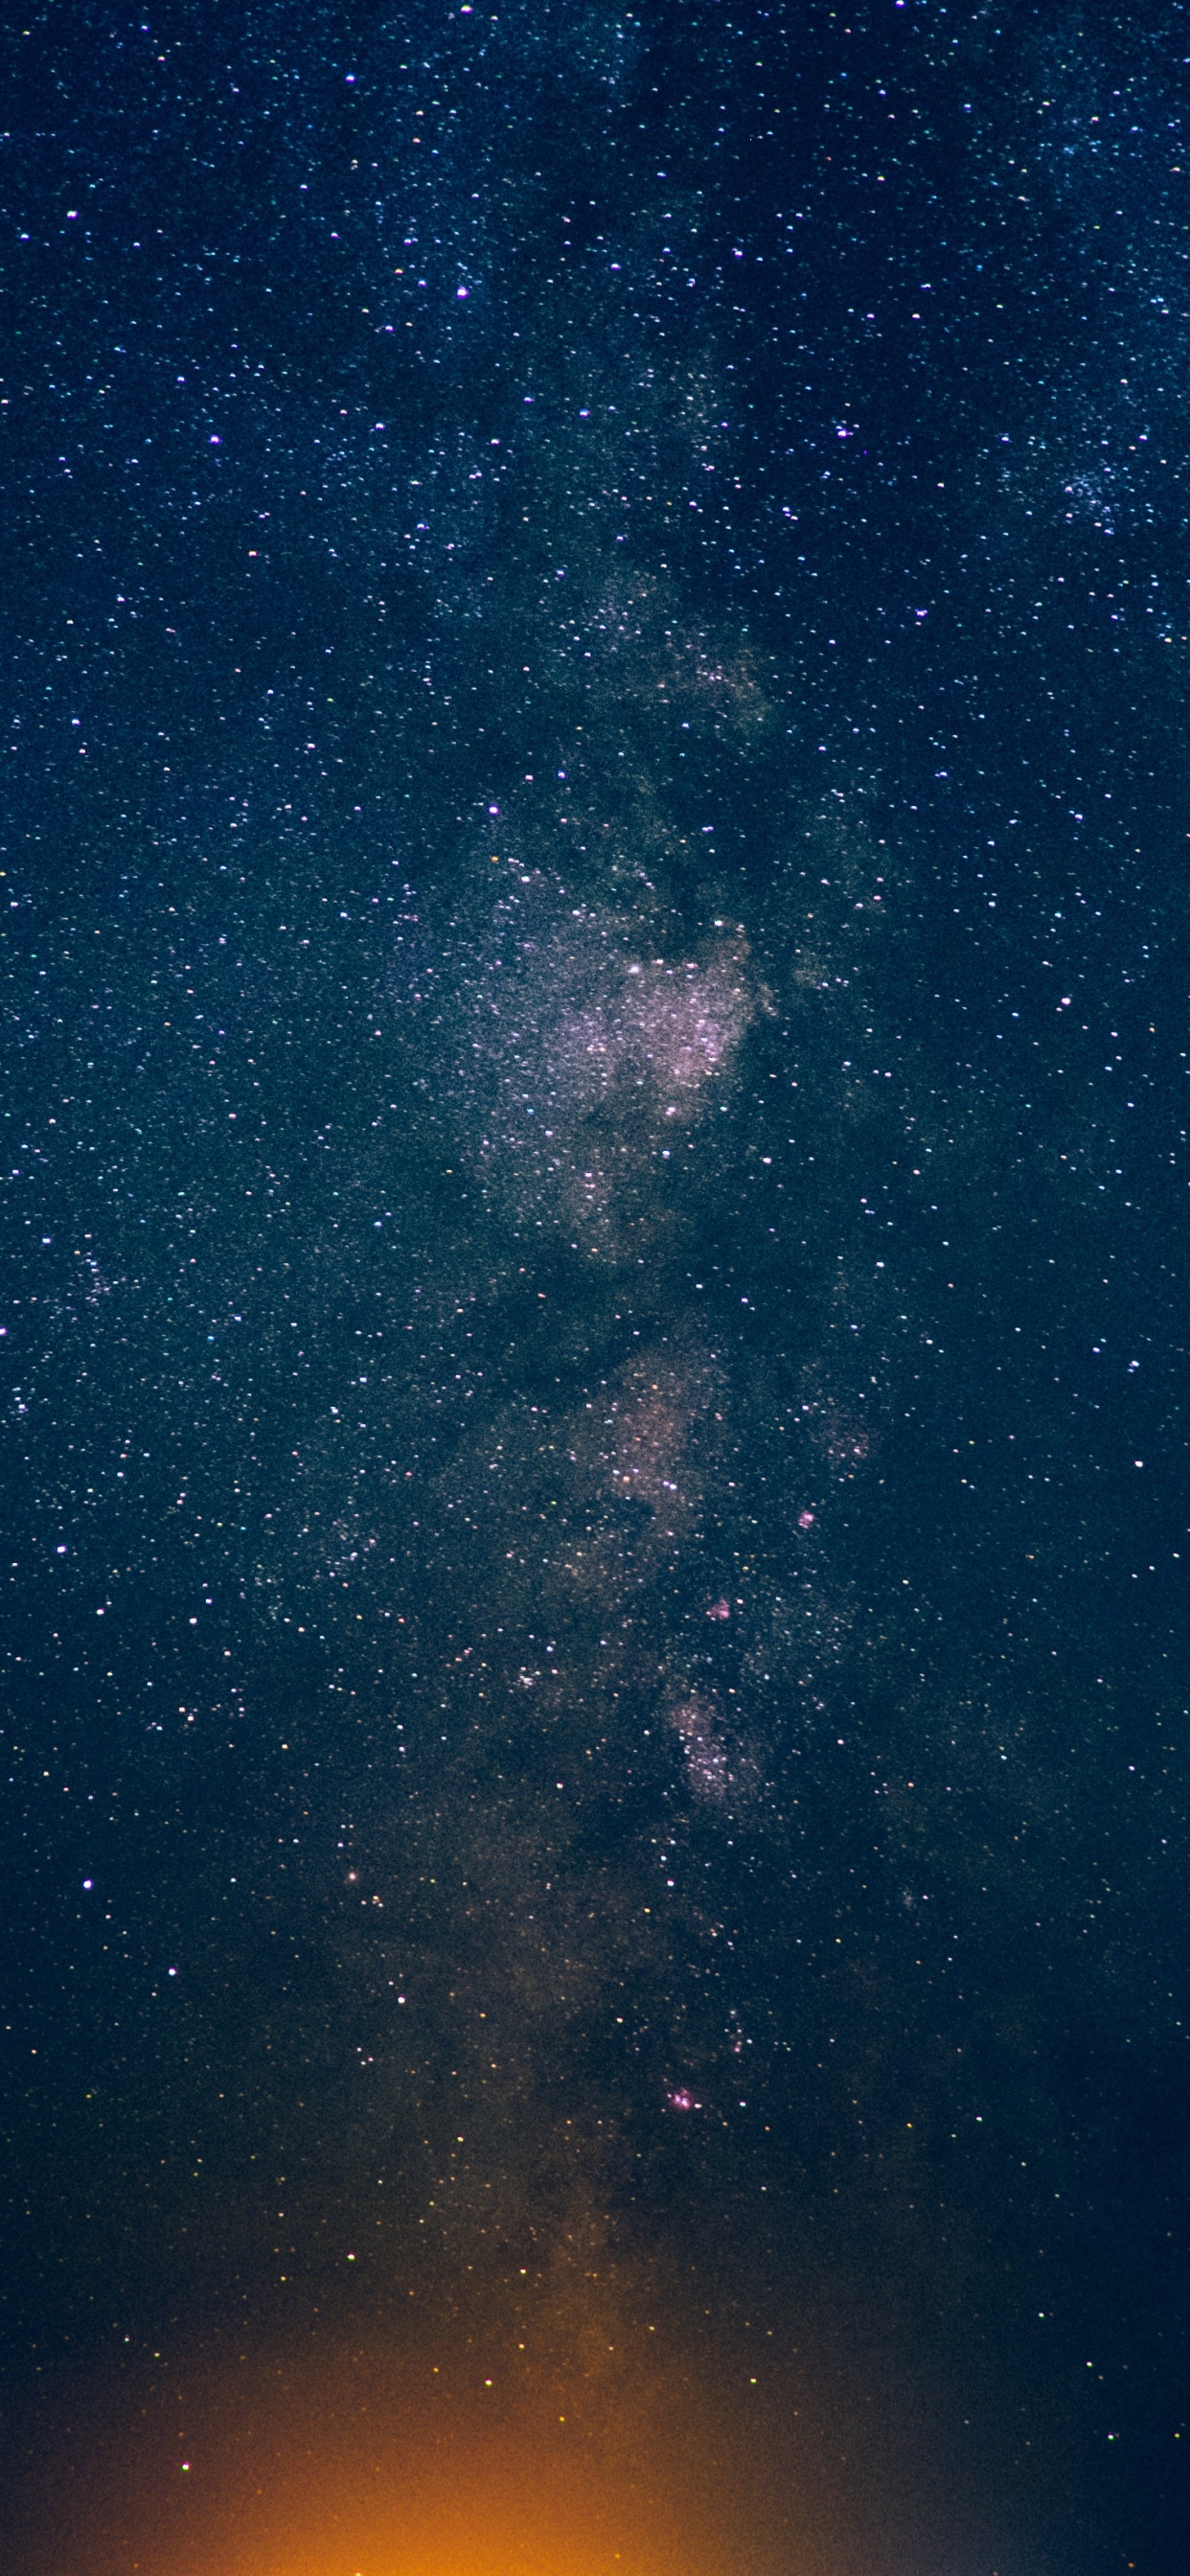 Starry Night Sky Over Starry Night. Wallpaper in 1242x2688 Resolution